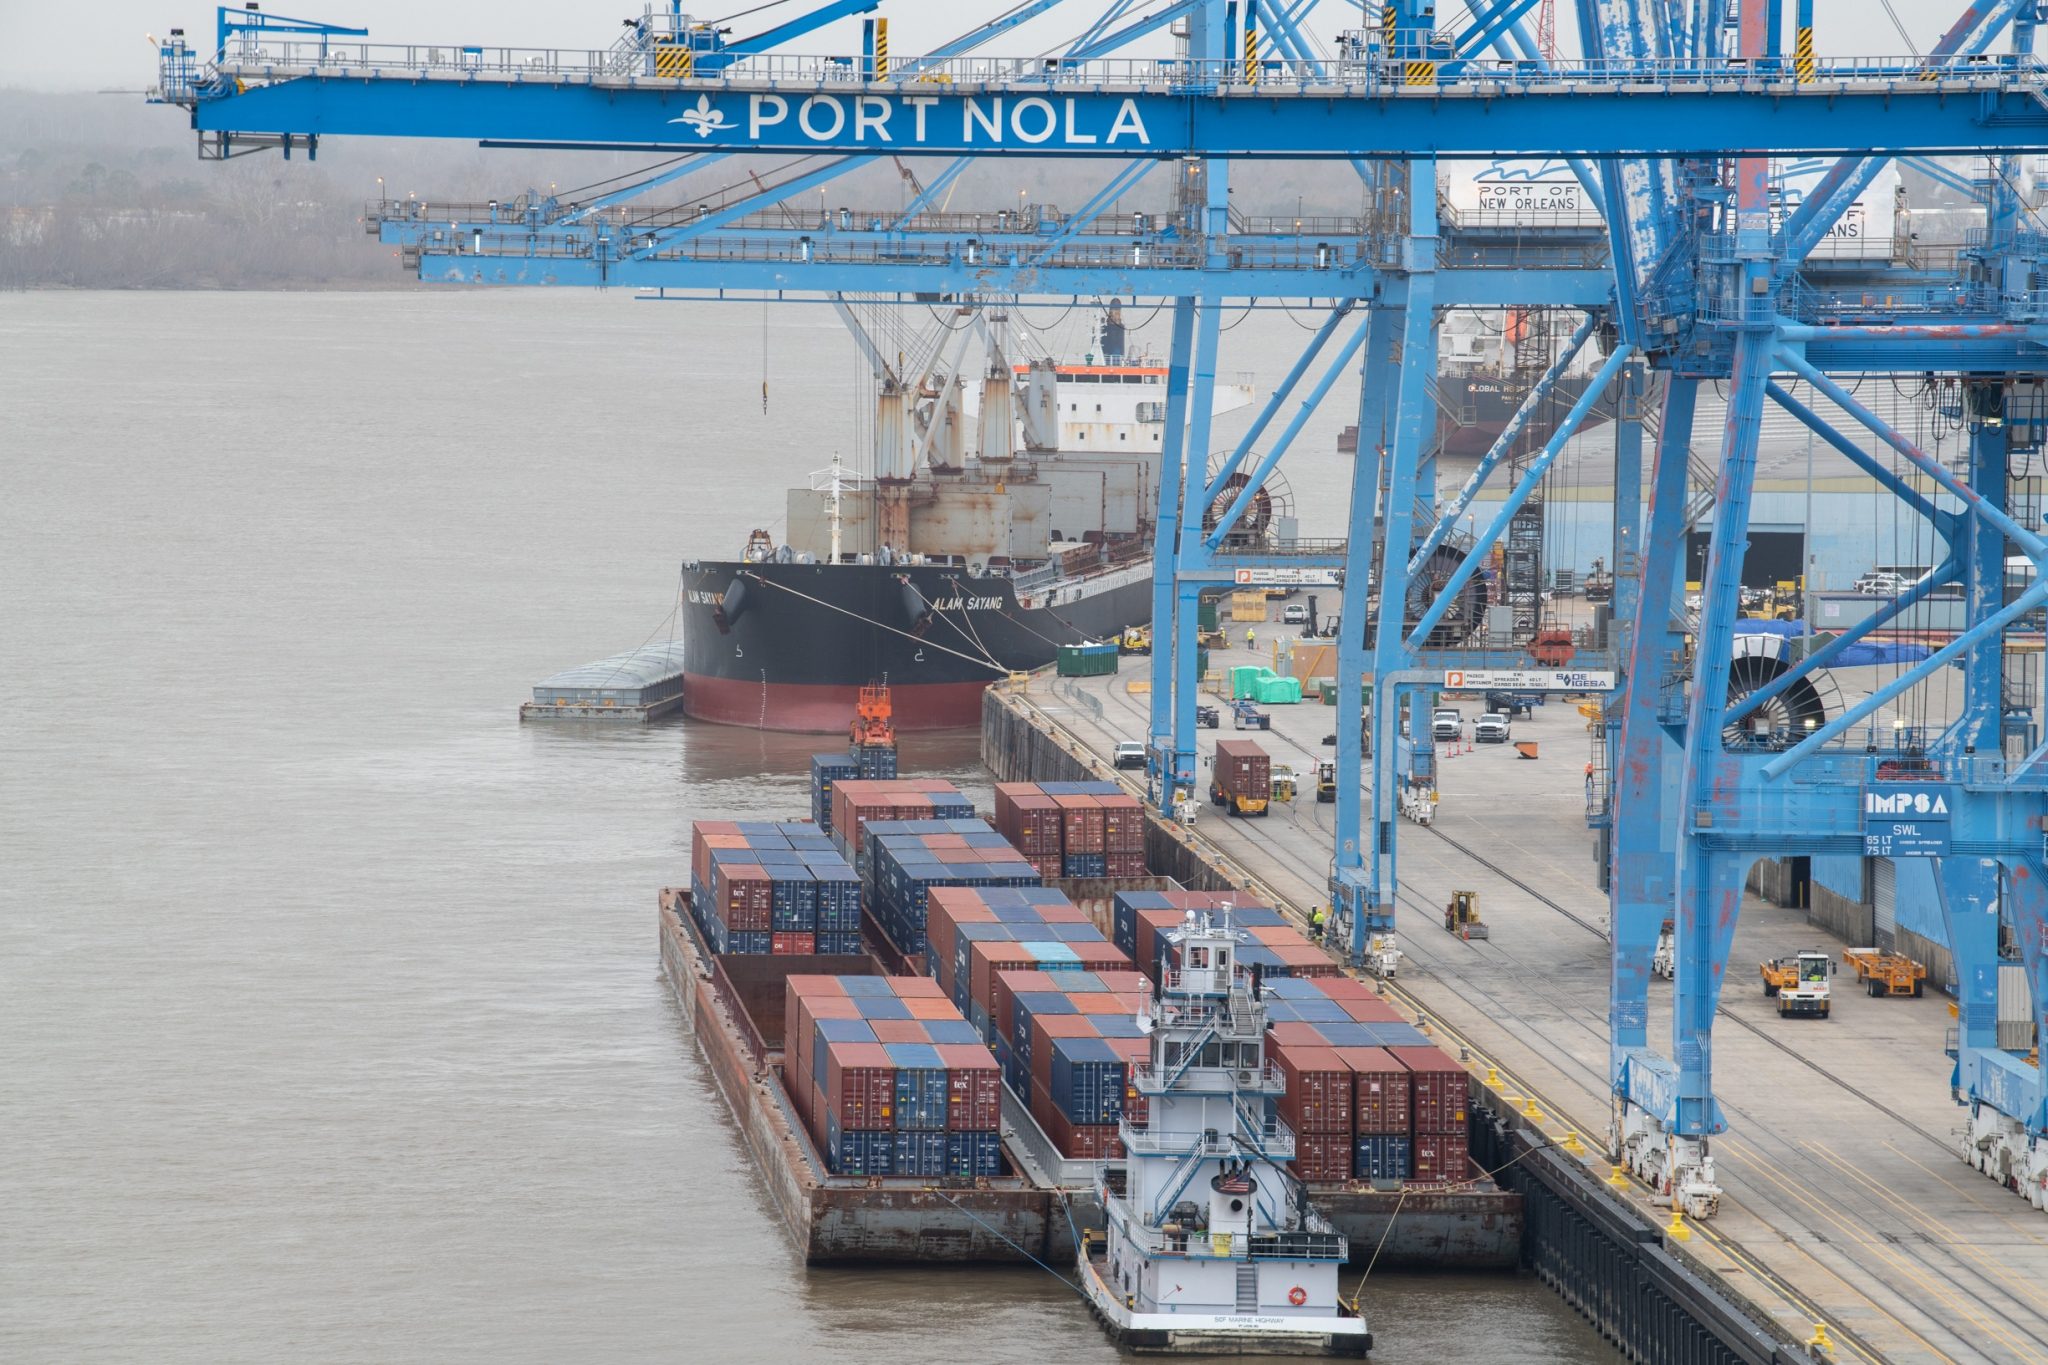 Container-on-barge service in Port NOLA